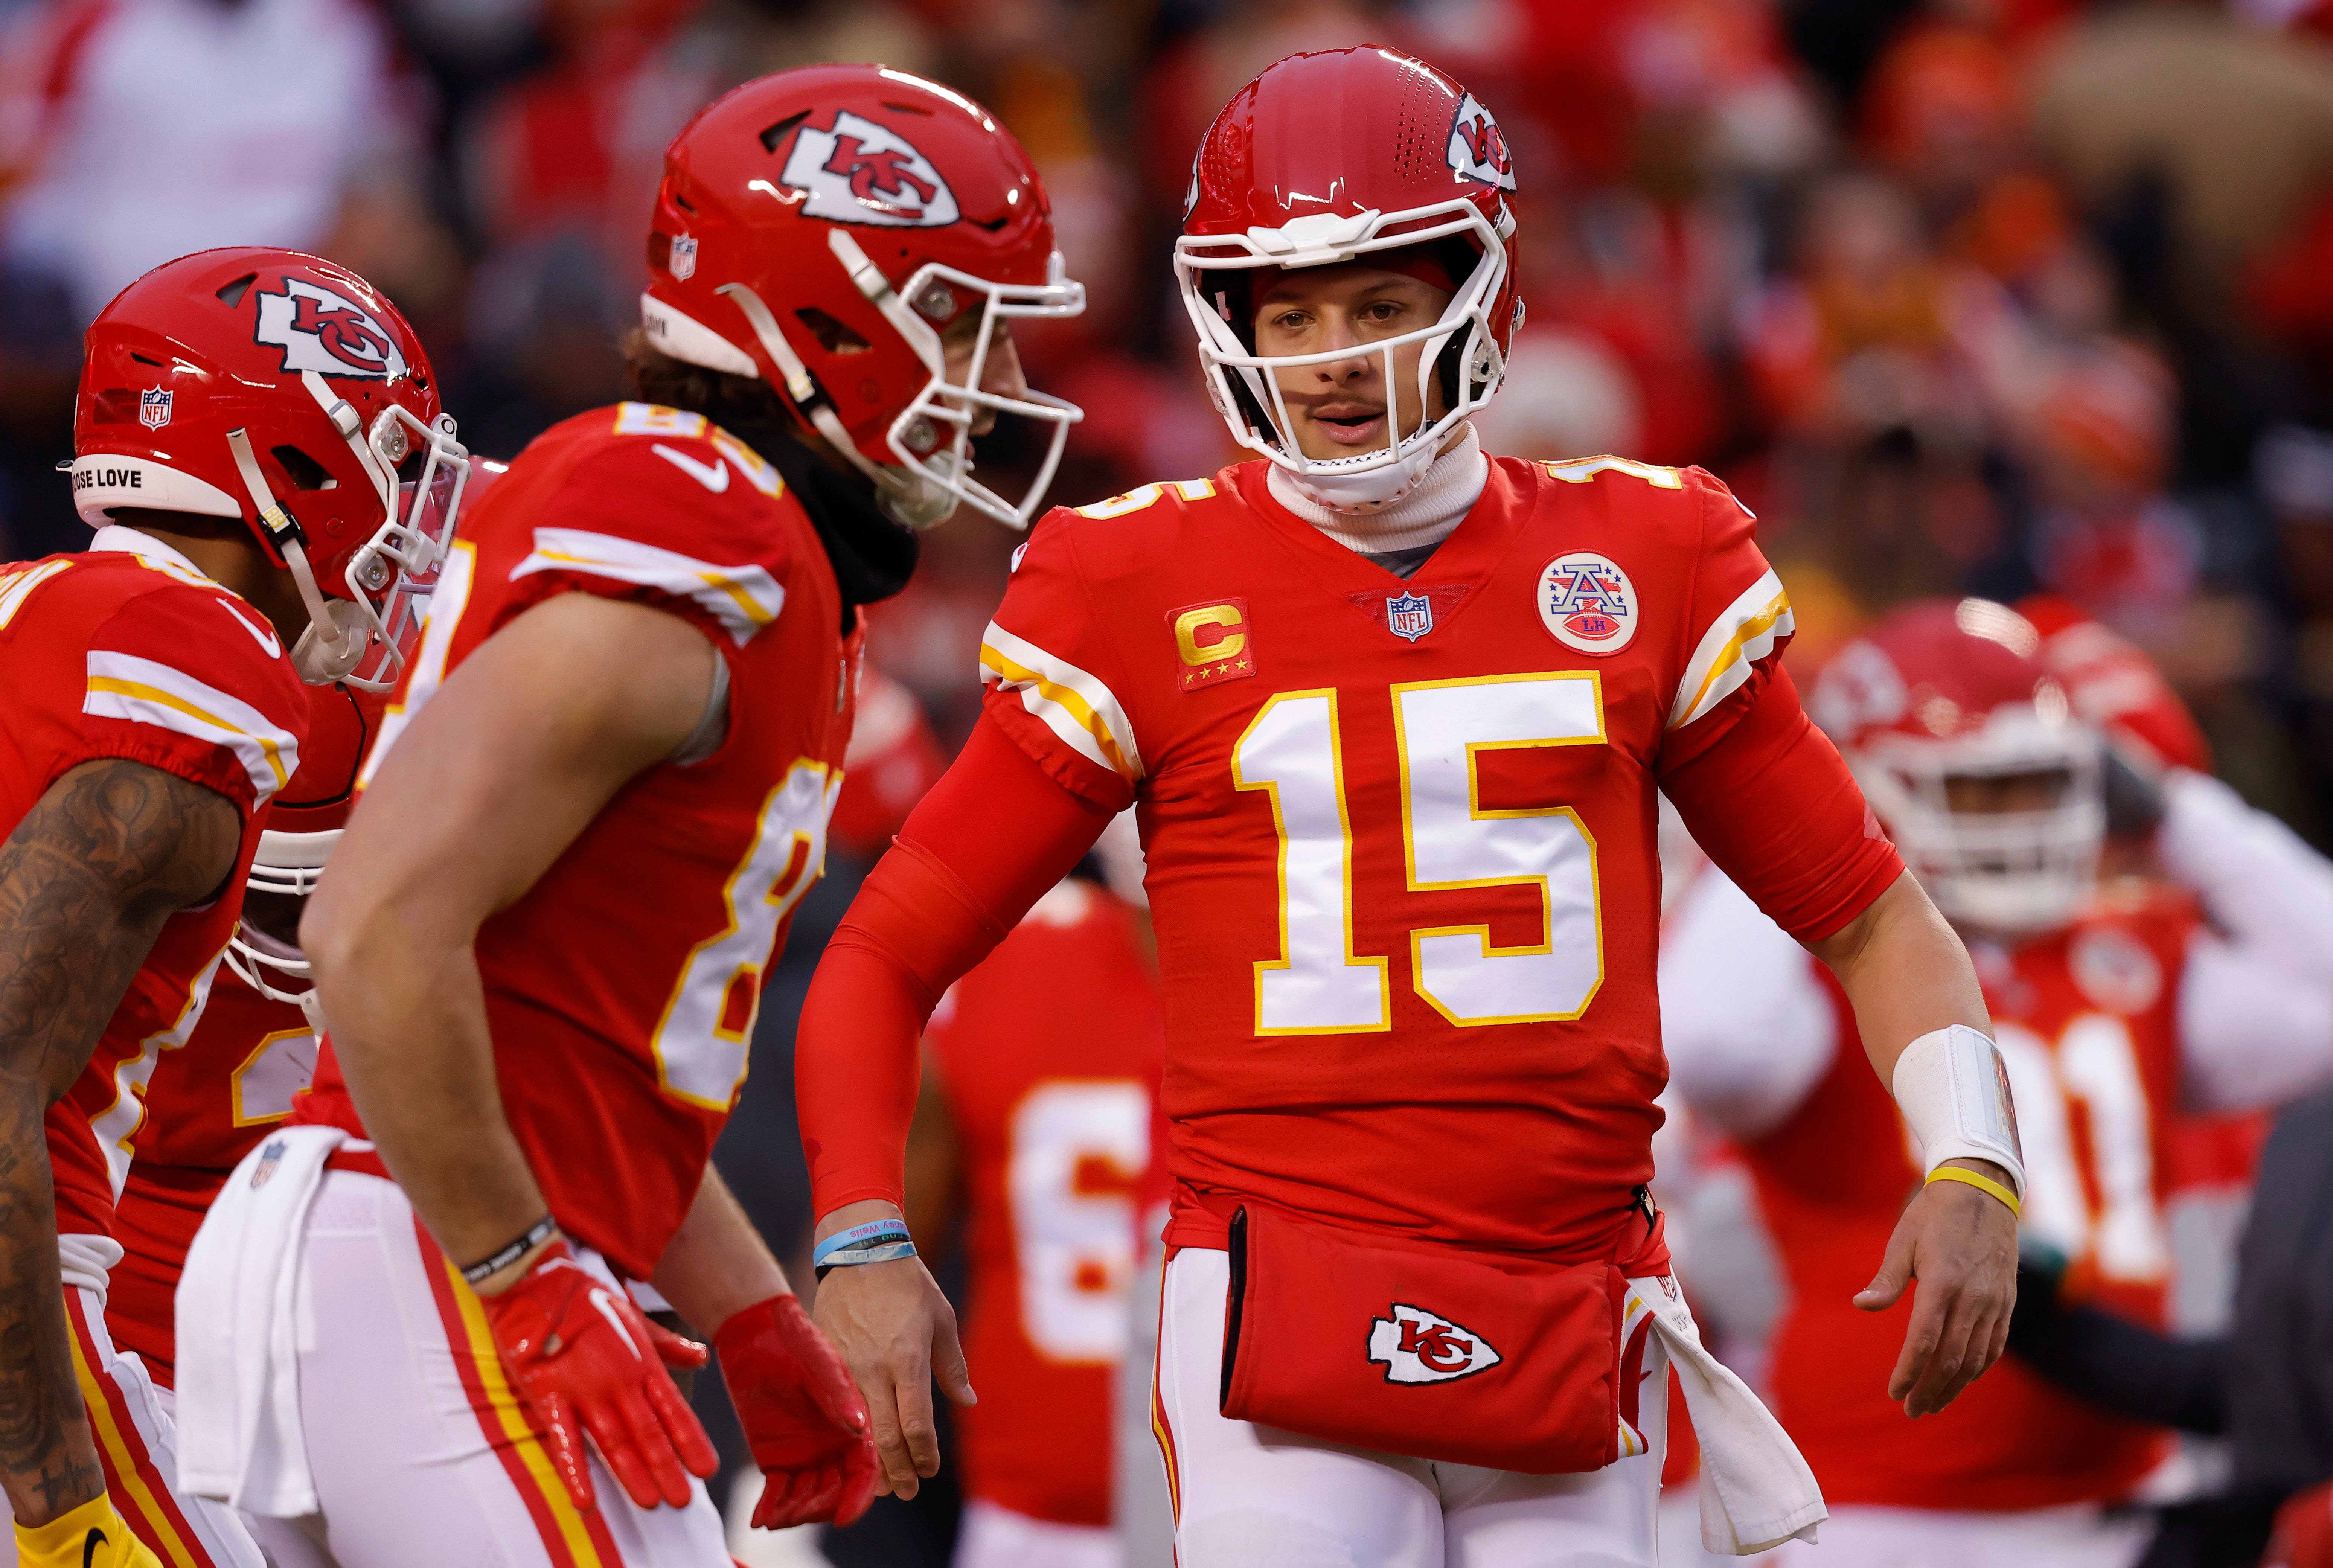 Chiefs vs. Bengals score, analysis: Kansas City takes early lead with field goals